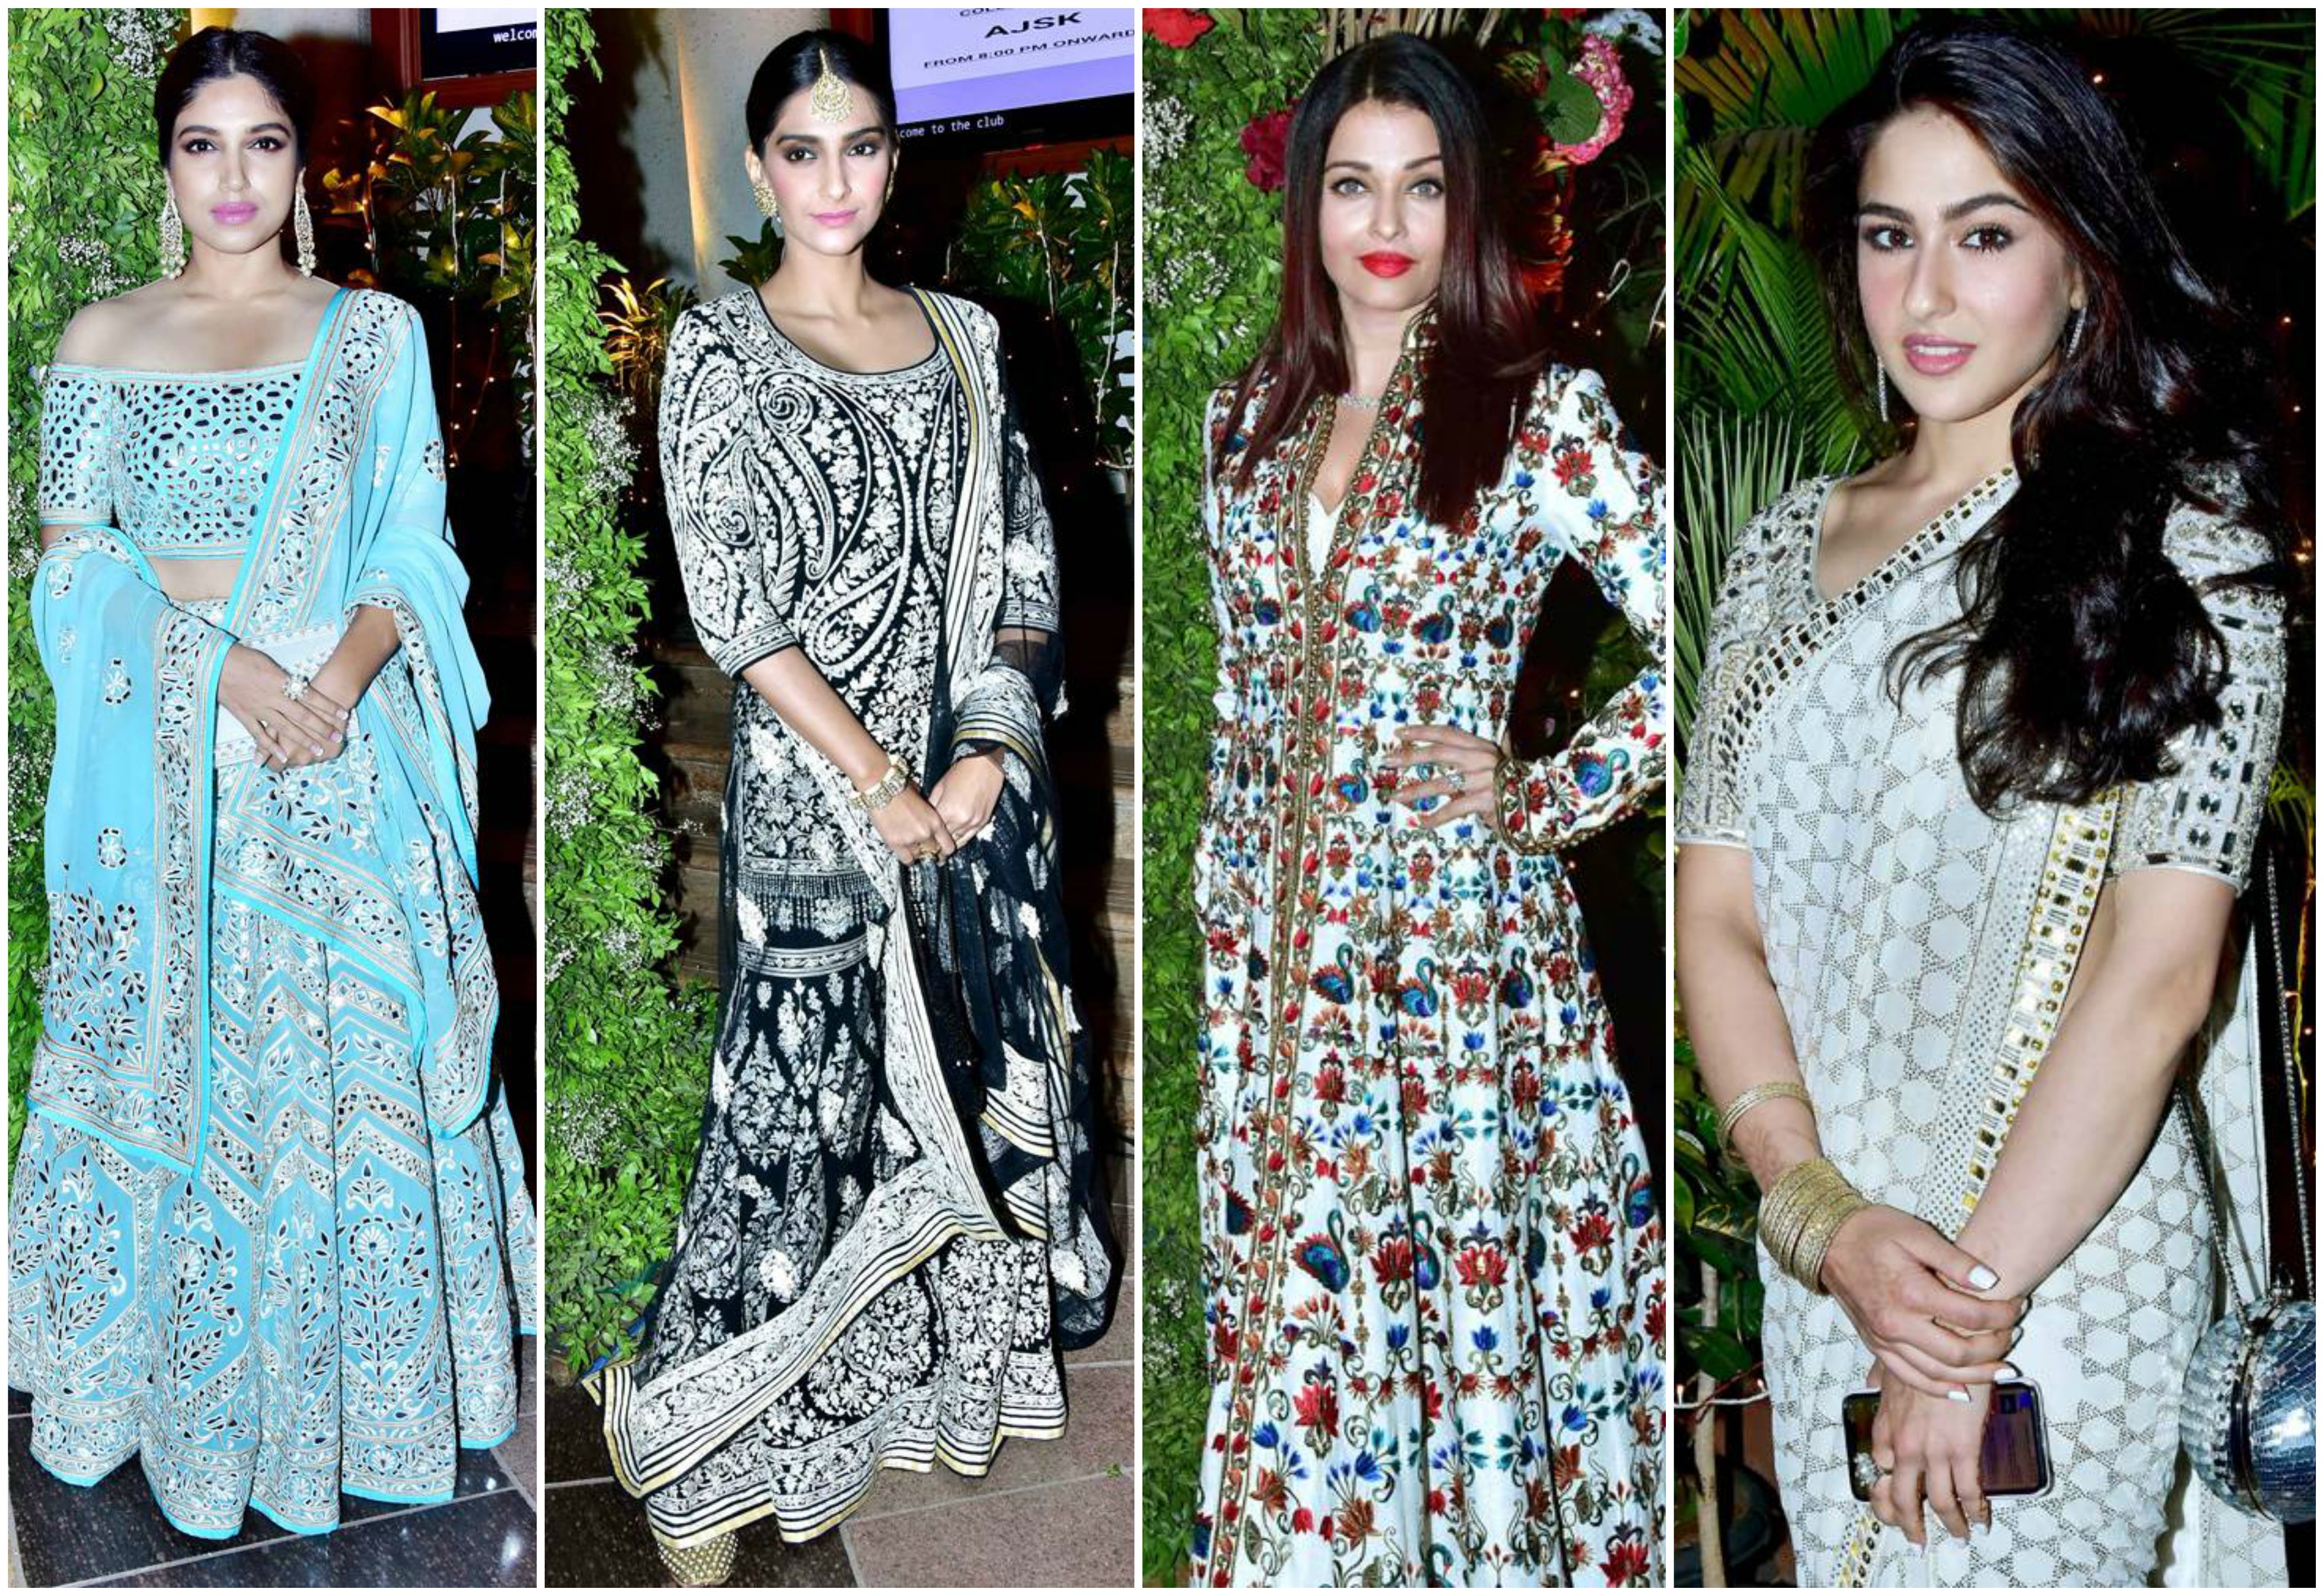 Bollywood celebrities show Indian glamor look at Wedding Reception